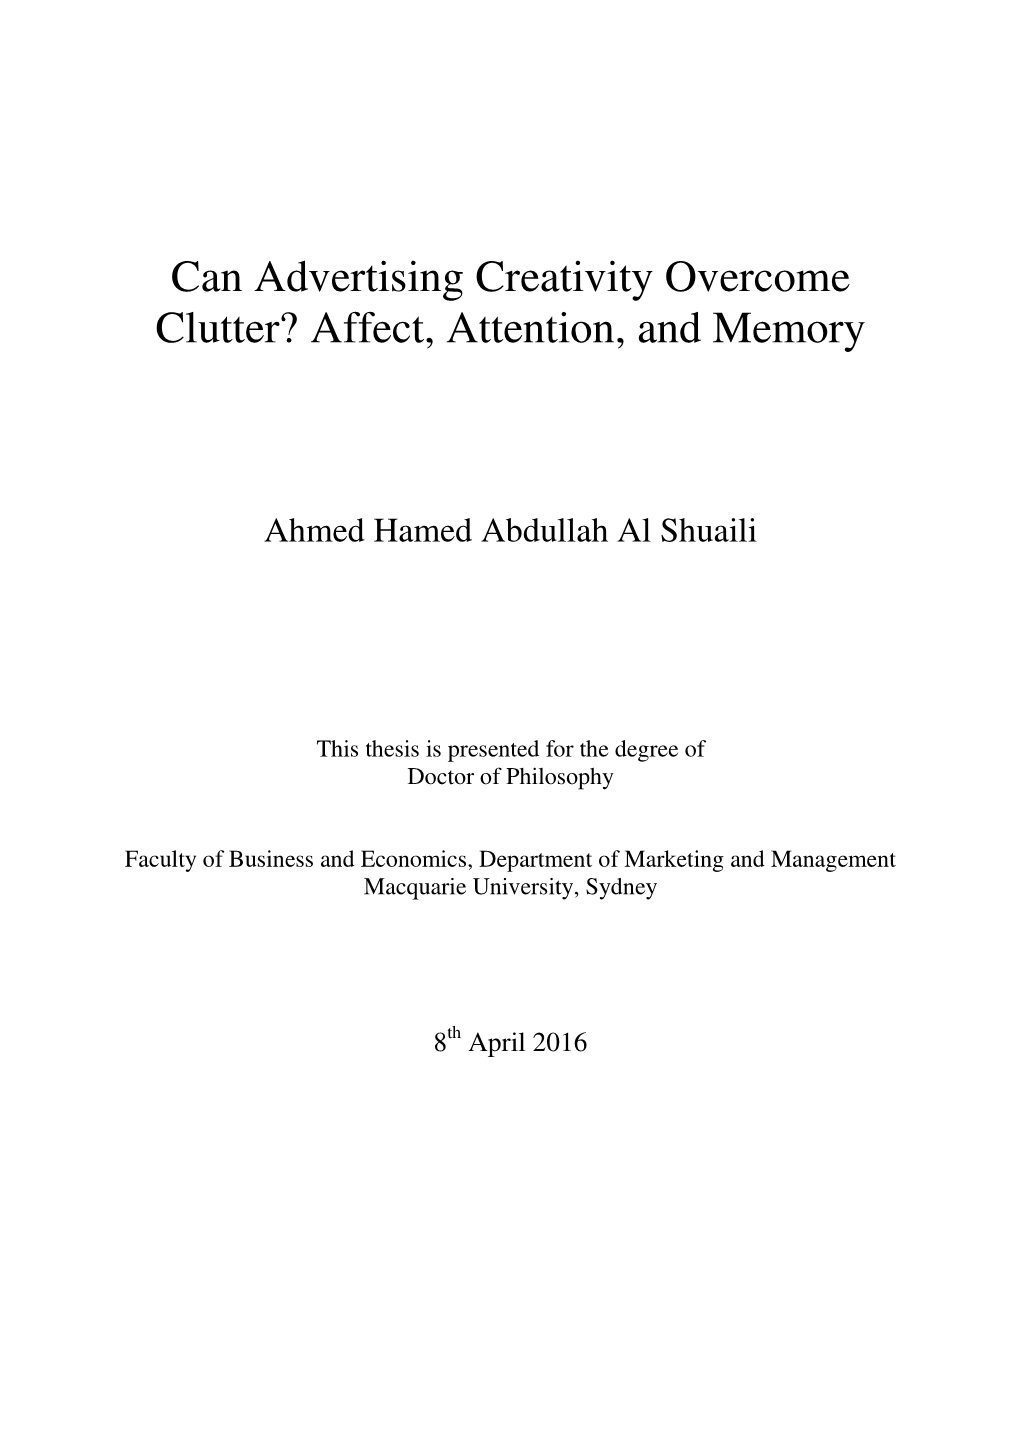 Can Advertising Creativity Overcome Clutter? Affect, Attention, and Memory